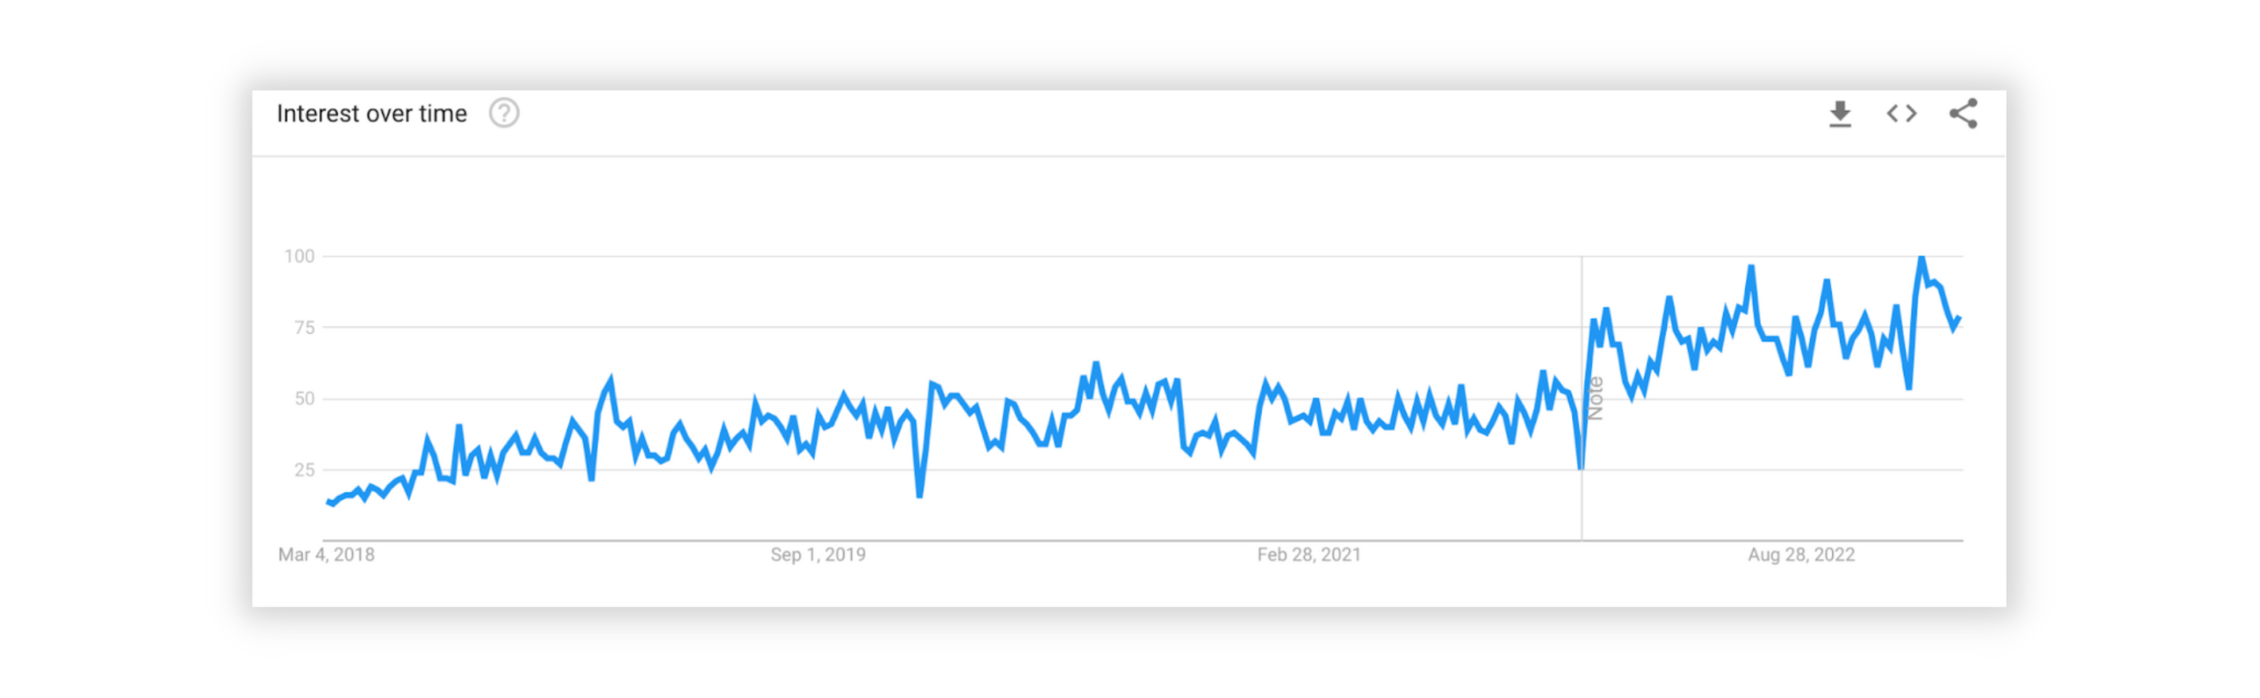 Google Trends chart for the product development trend "OKRs"